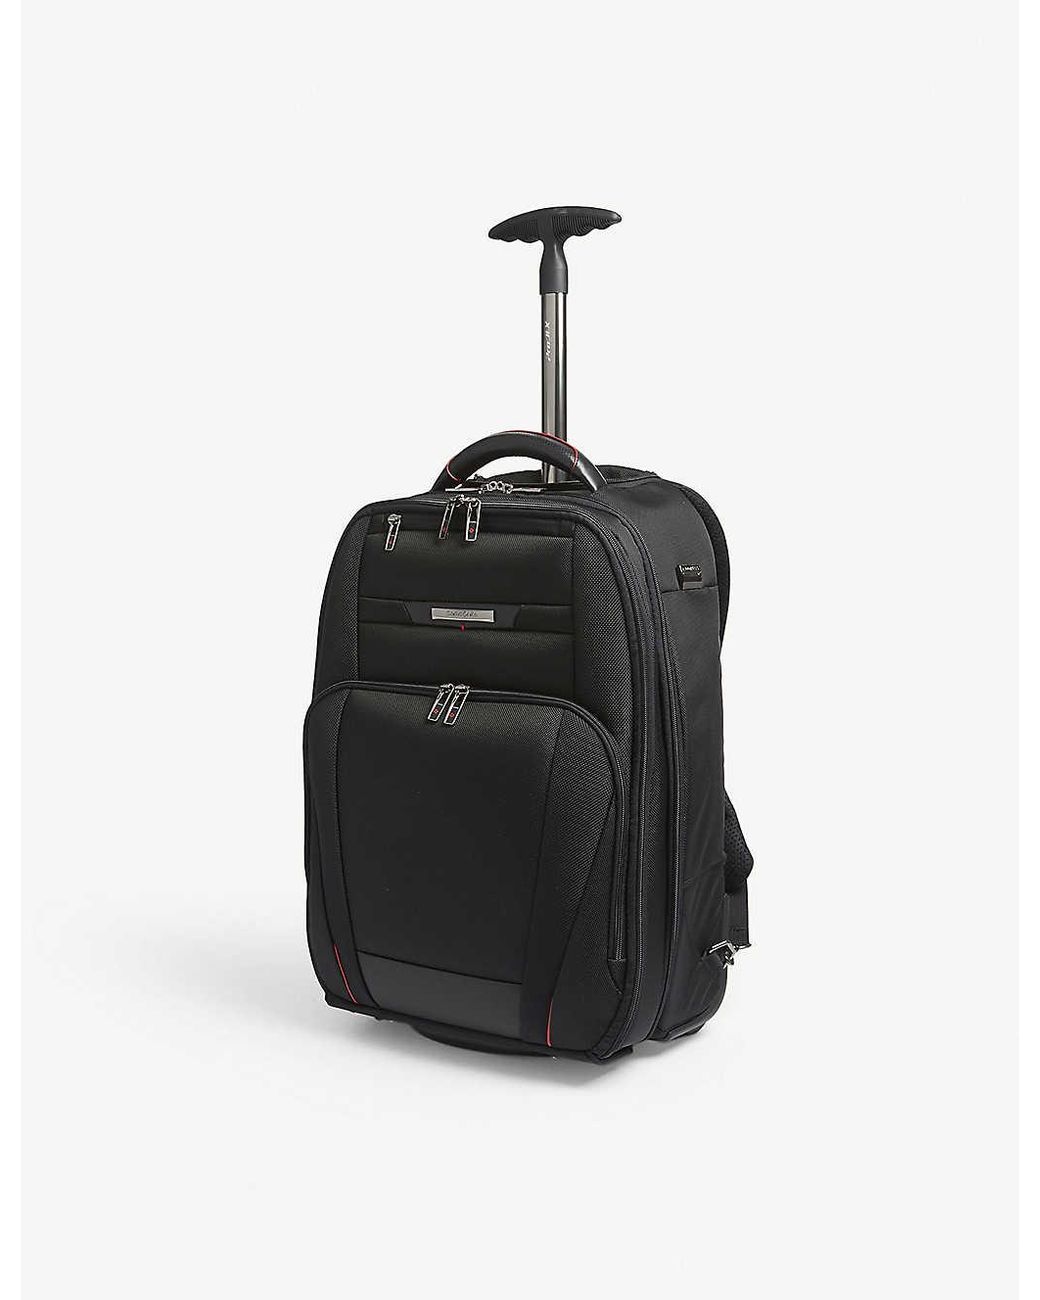 Samsonite Synthetic Pro-dlx 5 17.3" Laptop Backpack in Black | Lyst